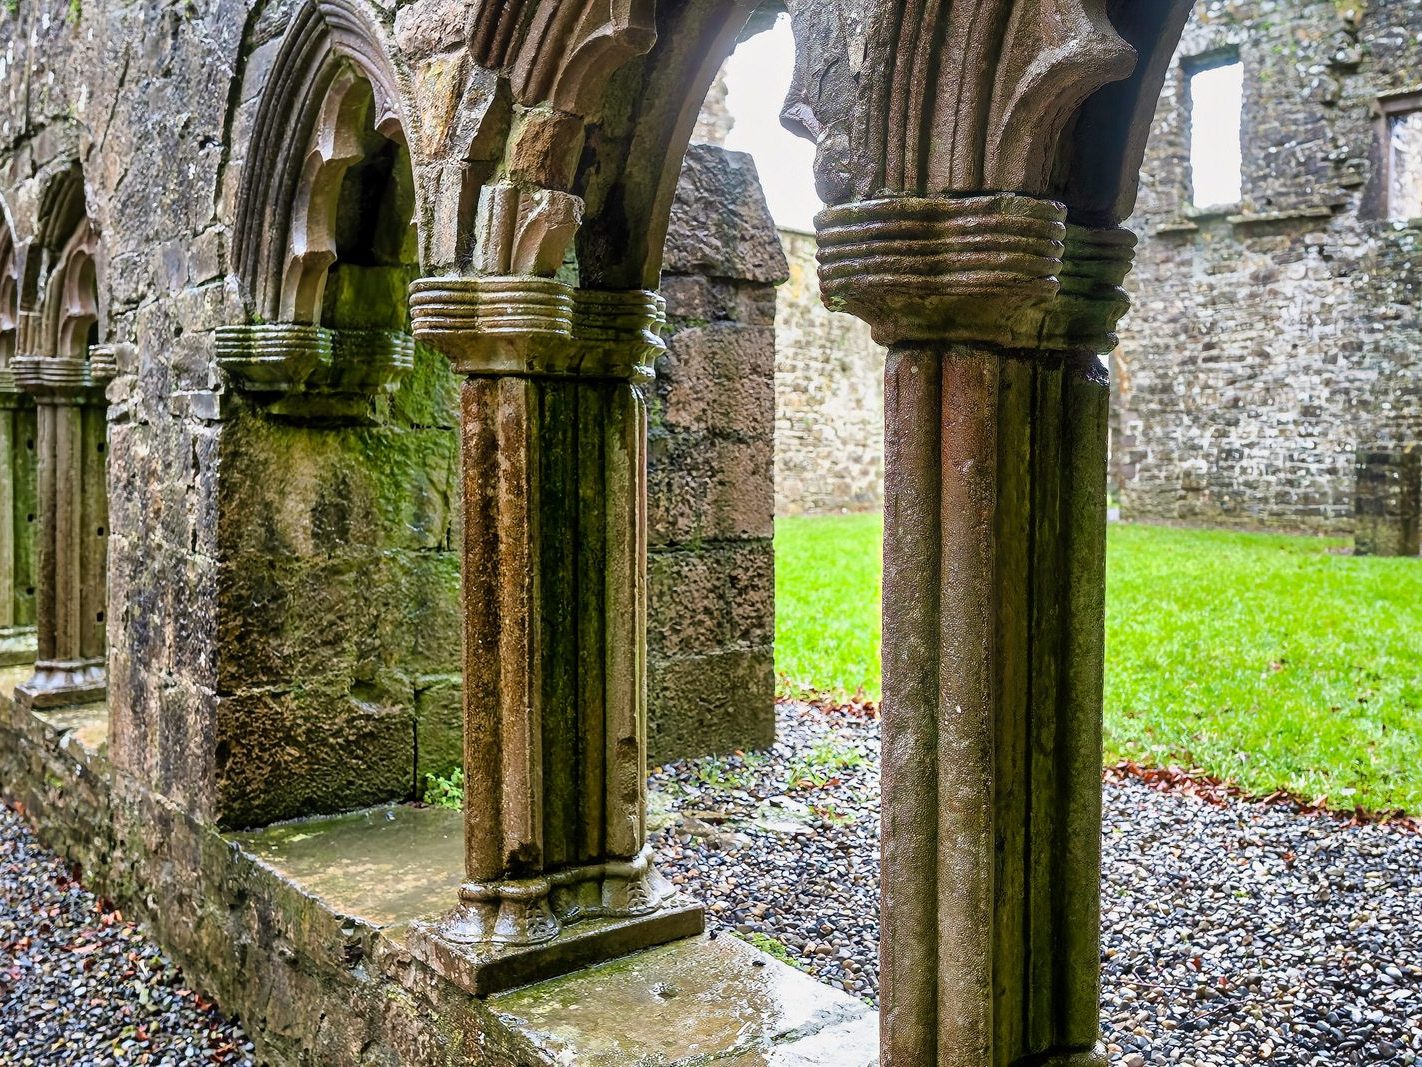 BECTIVE ABBEY WHICH I VISITED LAST CHRISTMAS [THERE WERE NO OTHER VISITORS AS IT WAS A VERY WET DAY]--225229-1